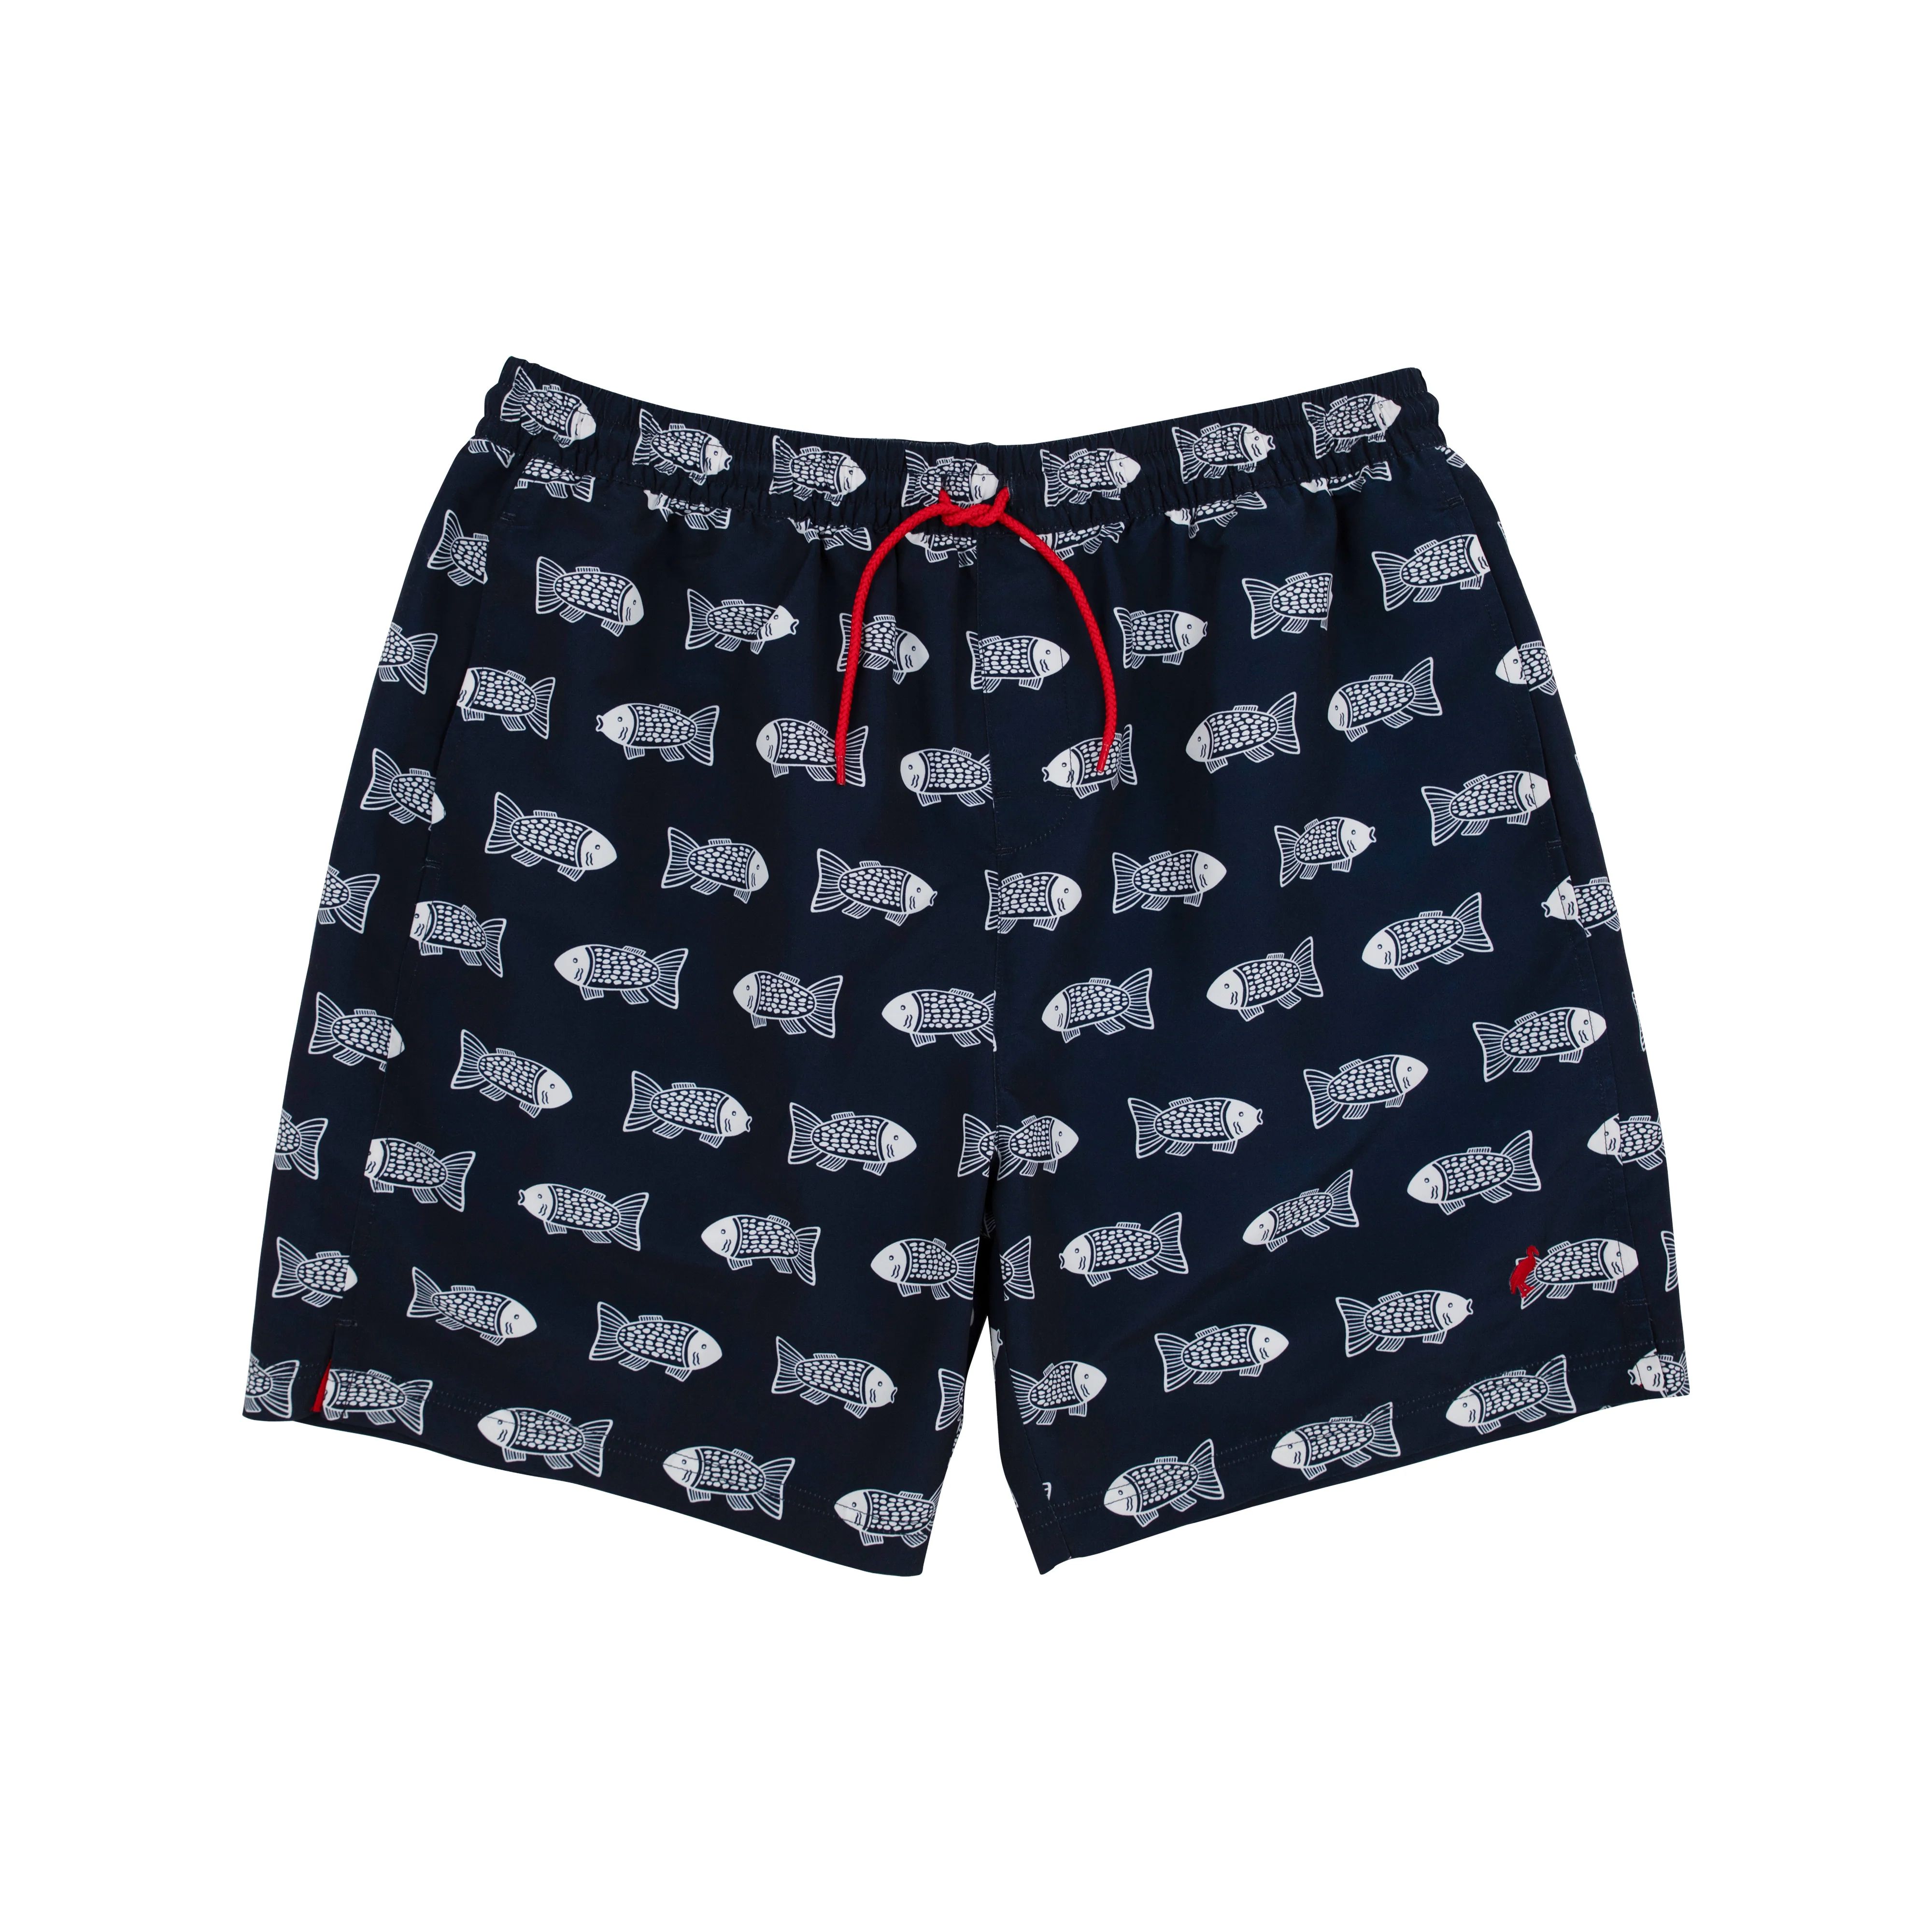 Toddy Trunks (Men's) - Fairfield Fish with Richmond Red | The Beaufort Bonnet Company